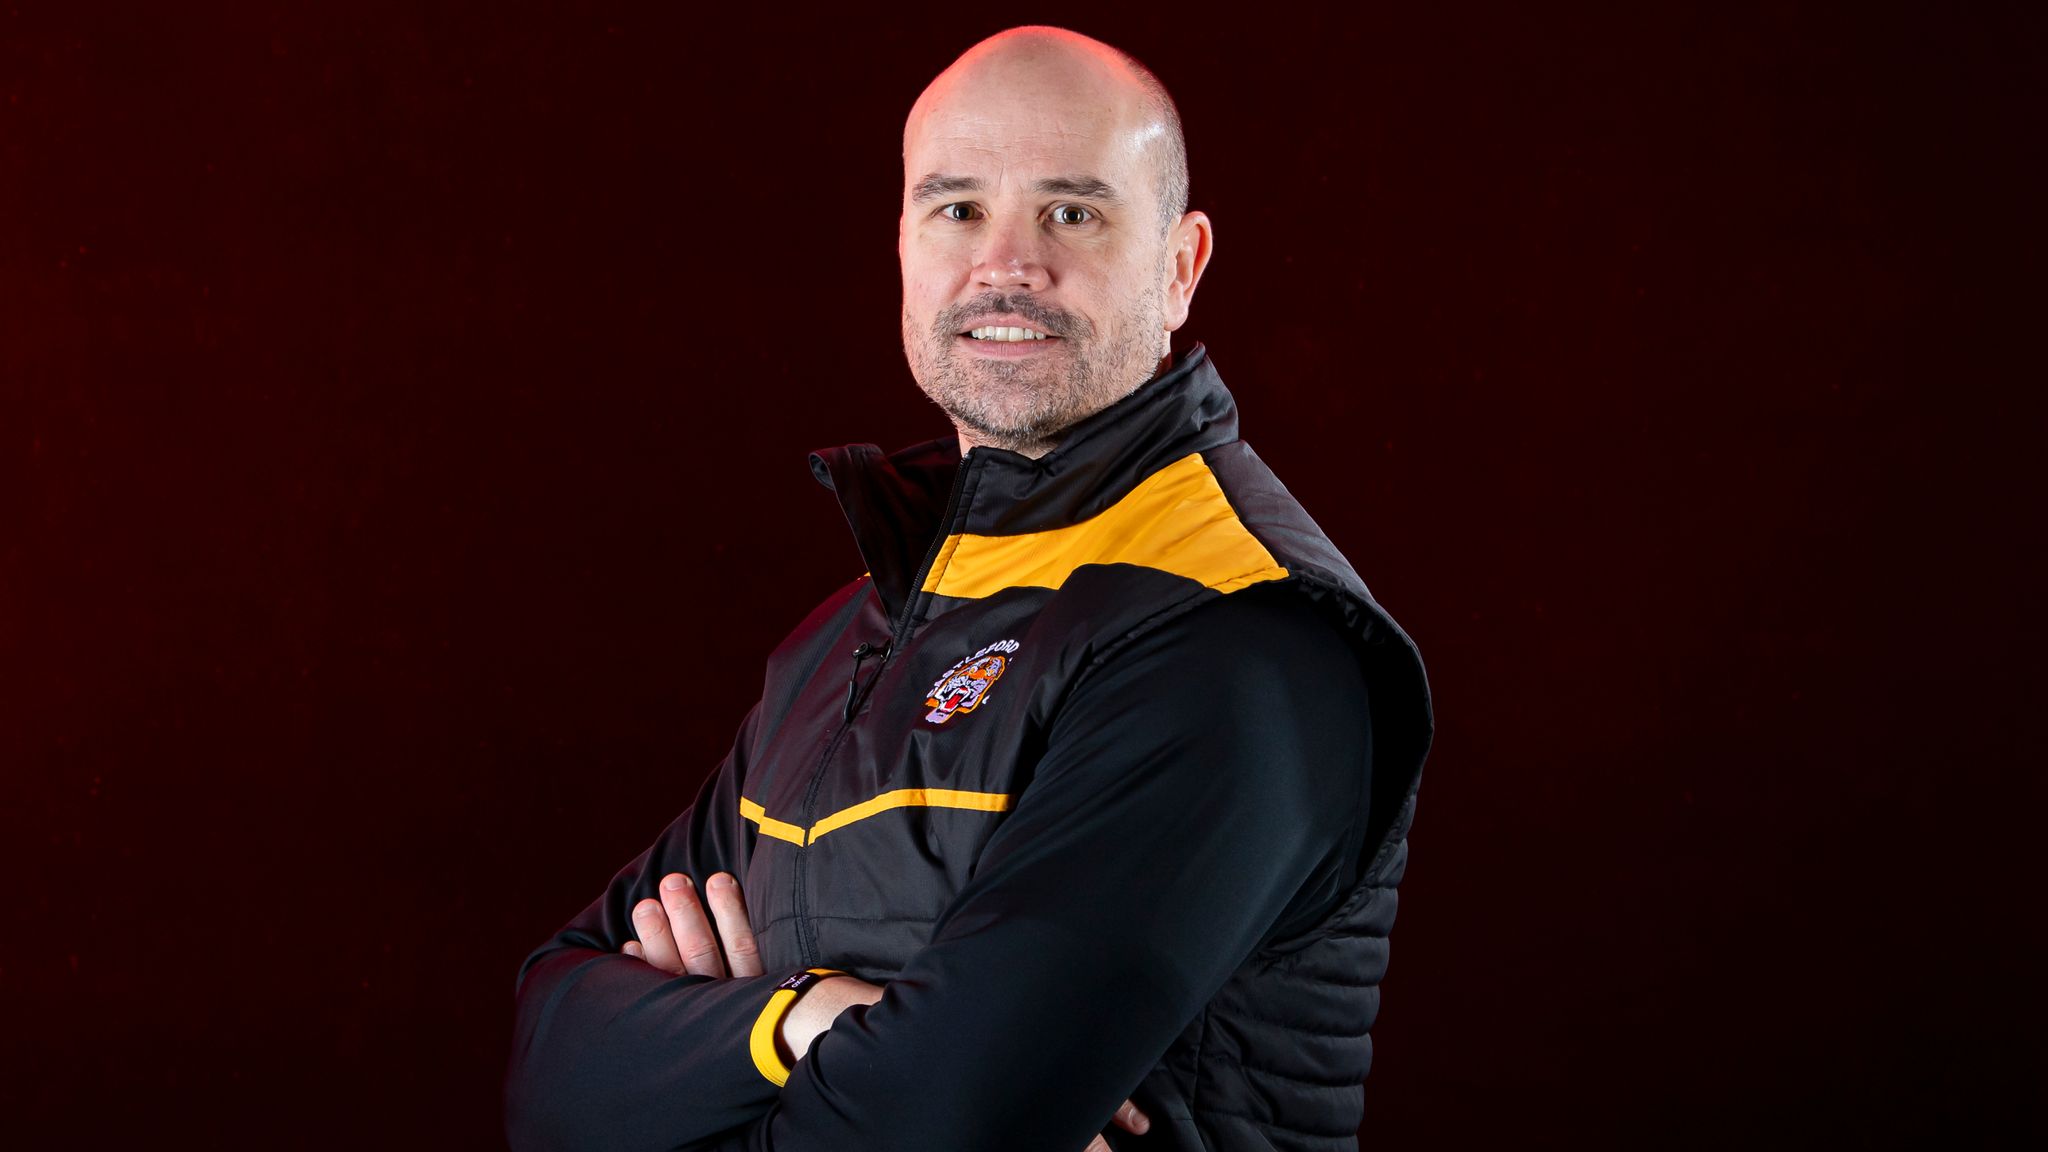 Craig Lingard: Castleford Tigers head coach's long road from prison officer  to Super League boss | Rugby League News | Sky Sports